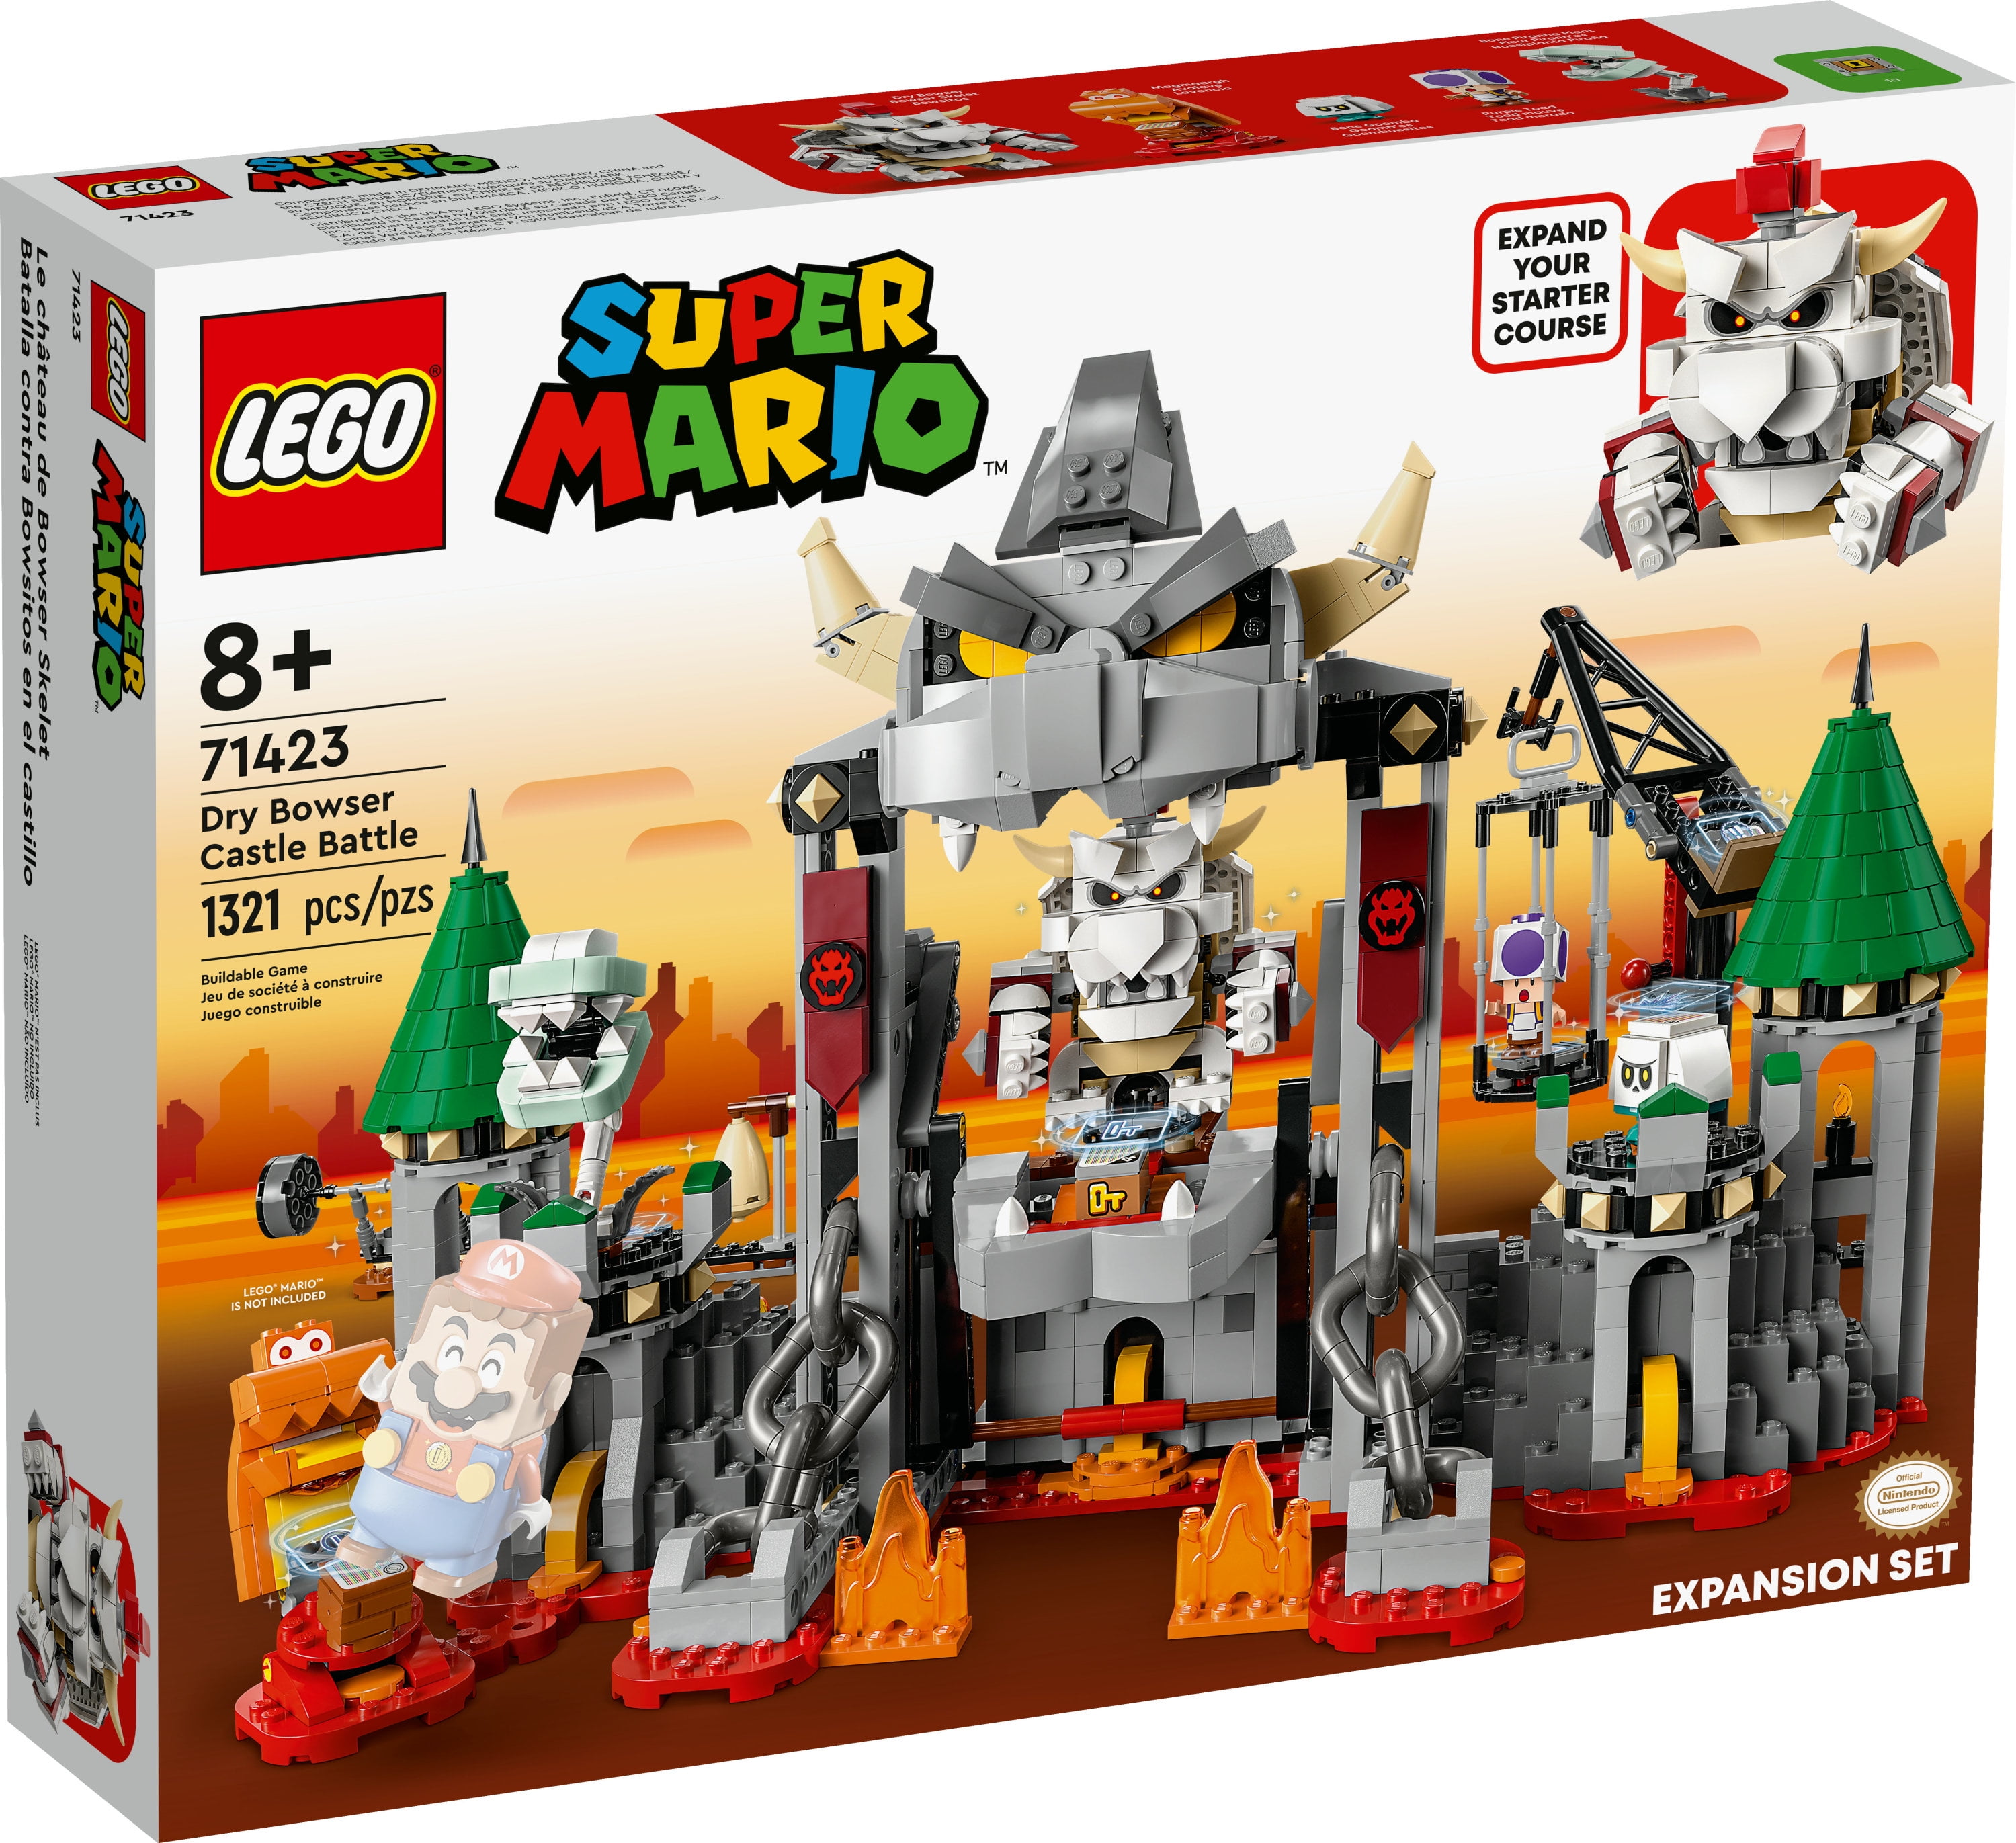 Lego's latest Super Mario set takes you to Dry Bowser's Castle